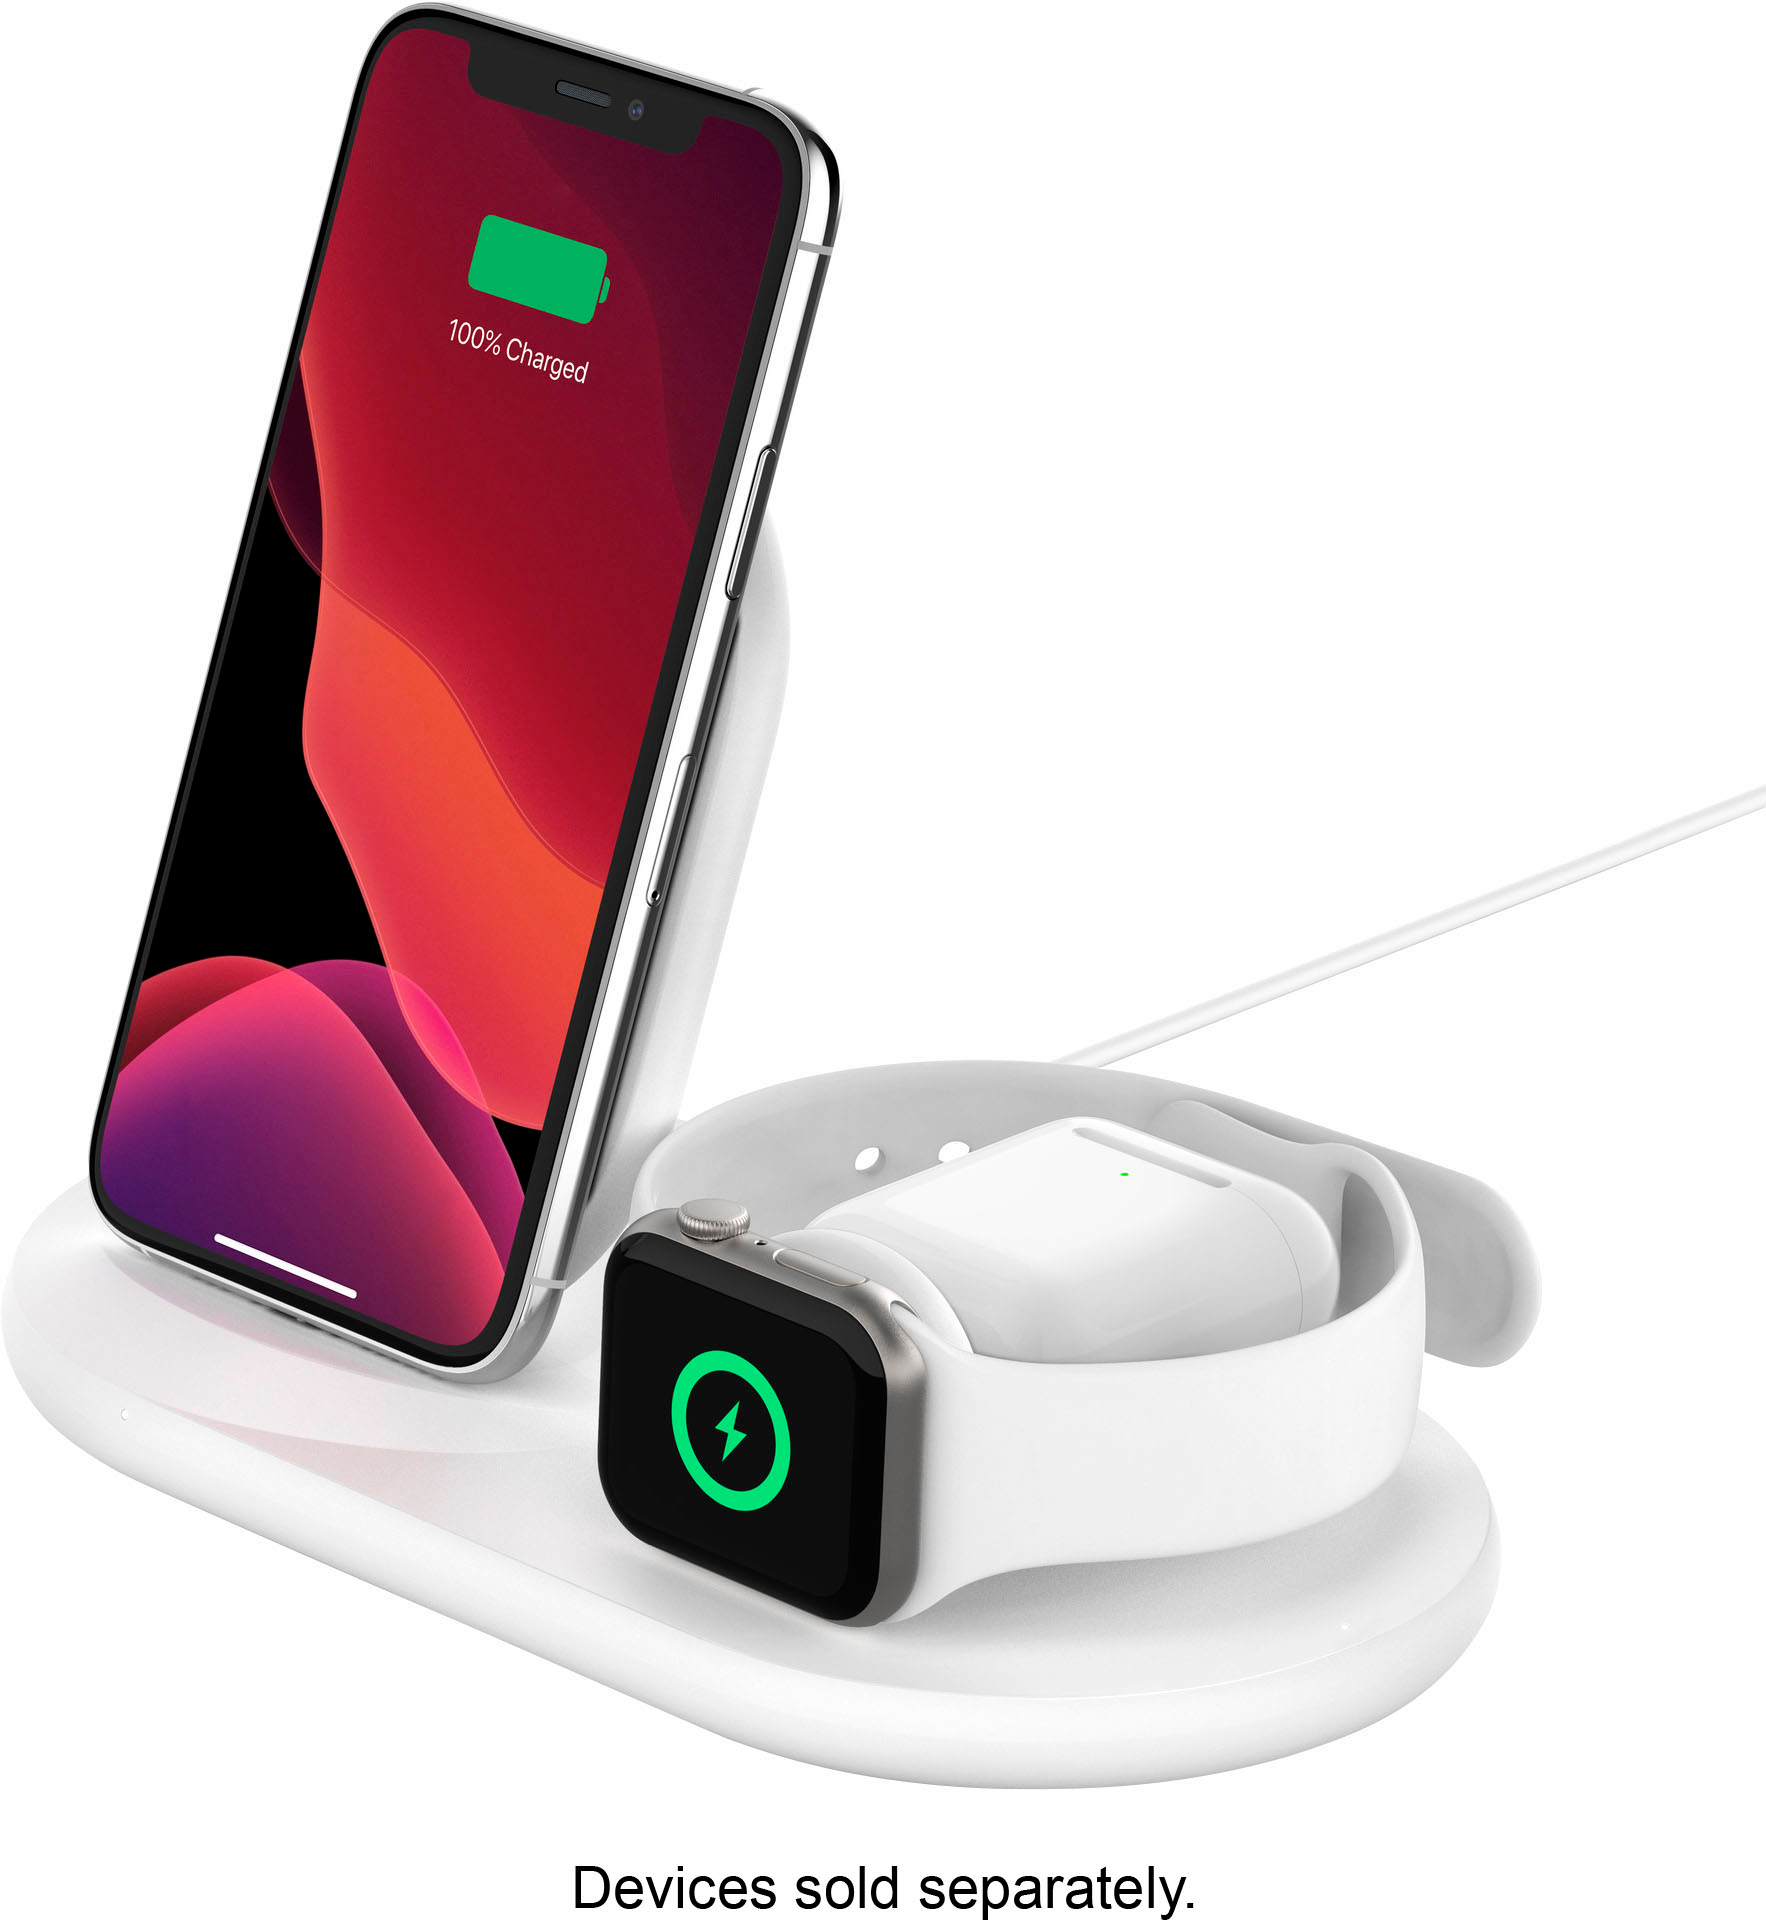  Lightning Deals 3 in 1 Wireless Charging Station, 15W Fast  Charger Stand for Smartphone SmartWatch Earphones Multiple Devices,Gifts  for Men Women : Gift Cards